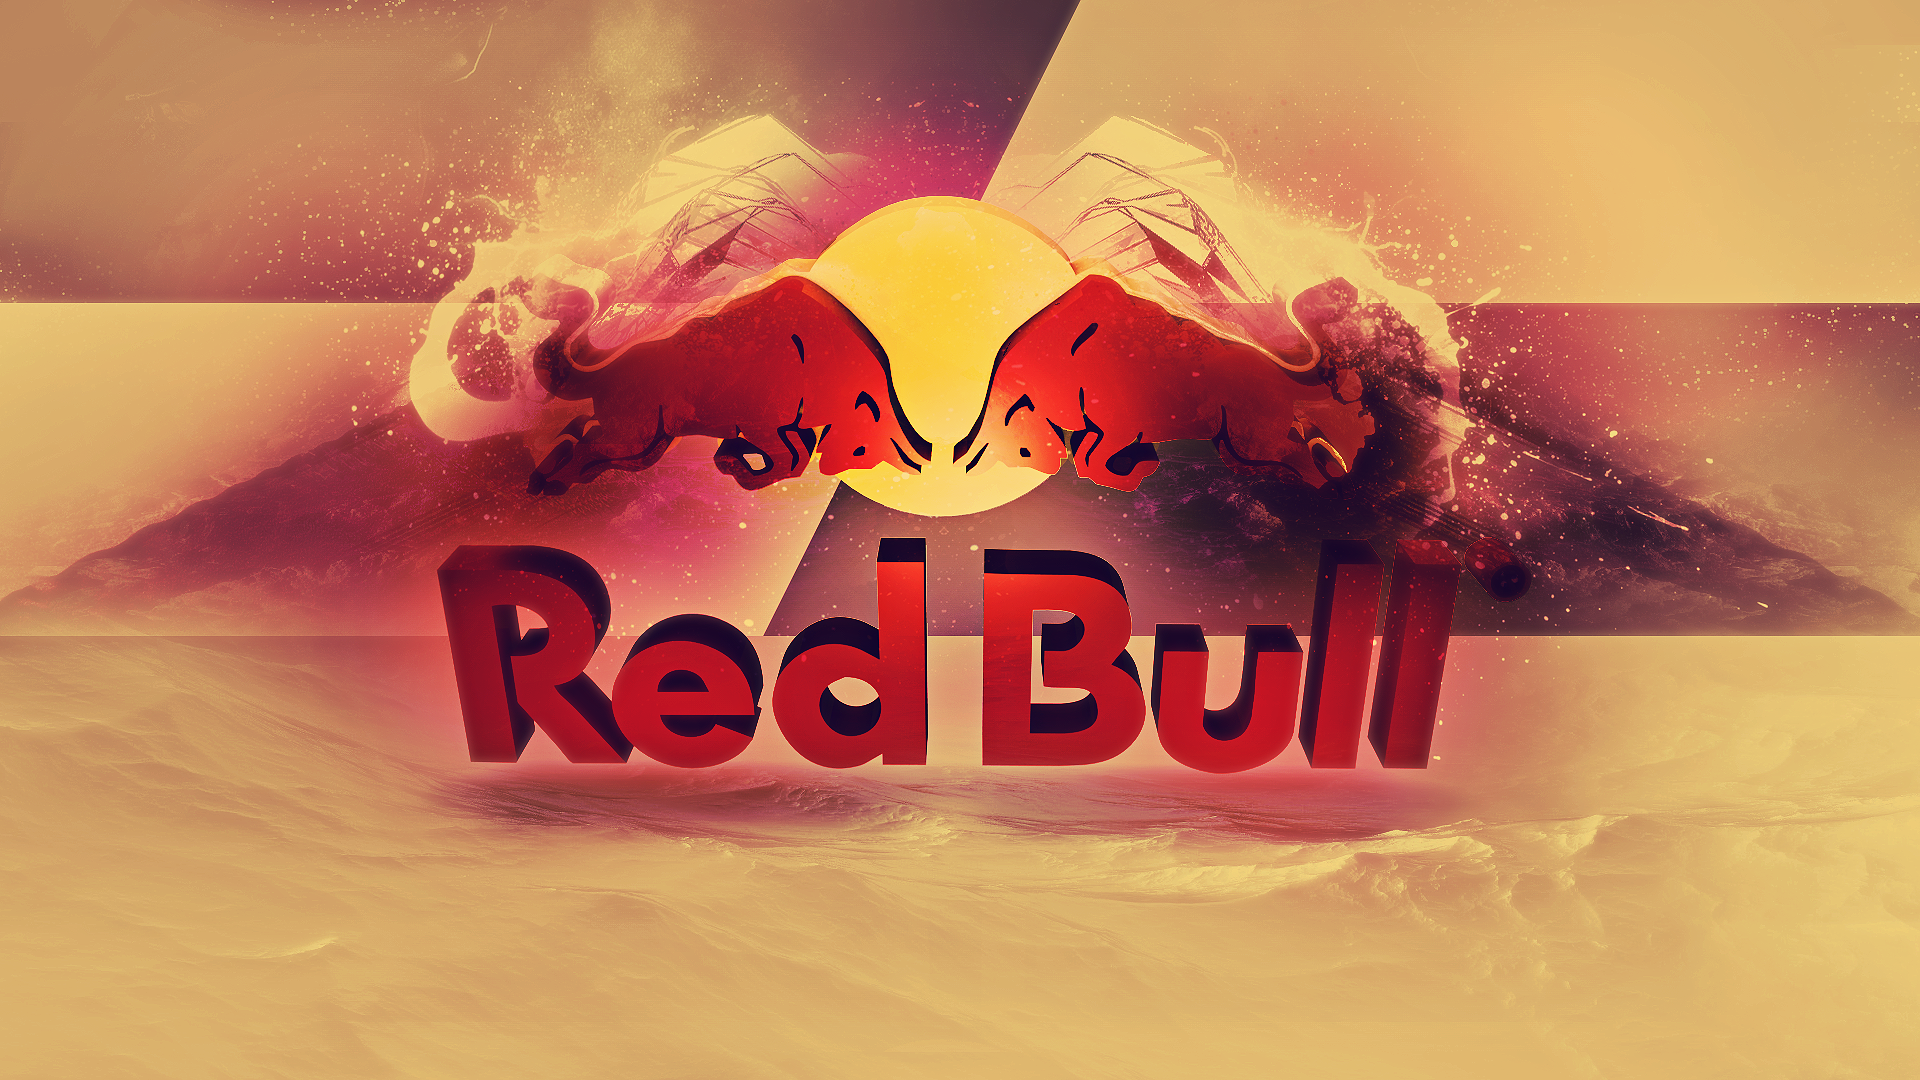 Awesome Red Bull wallpaper | 1920x1080